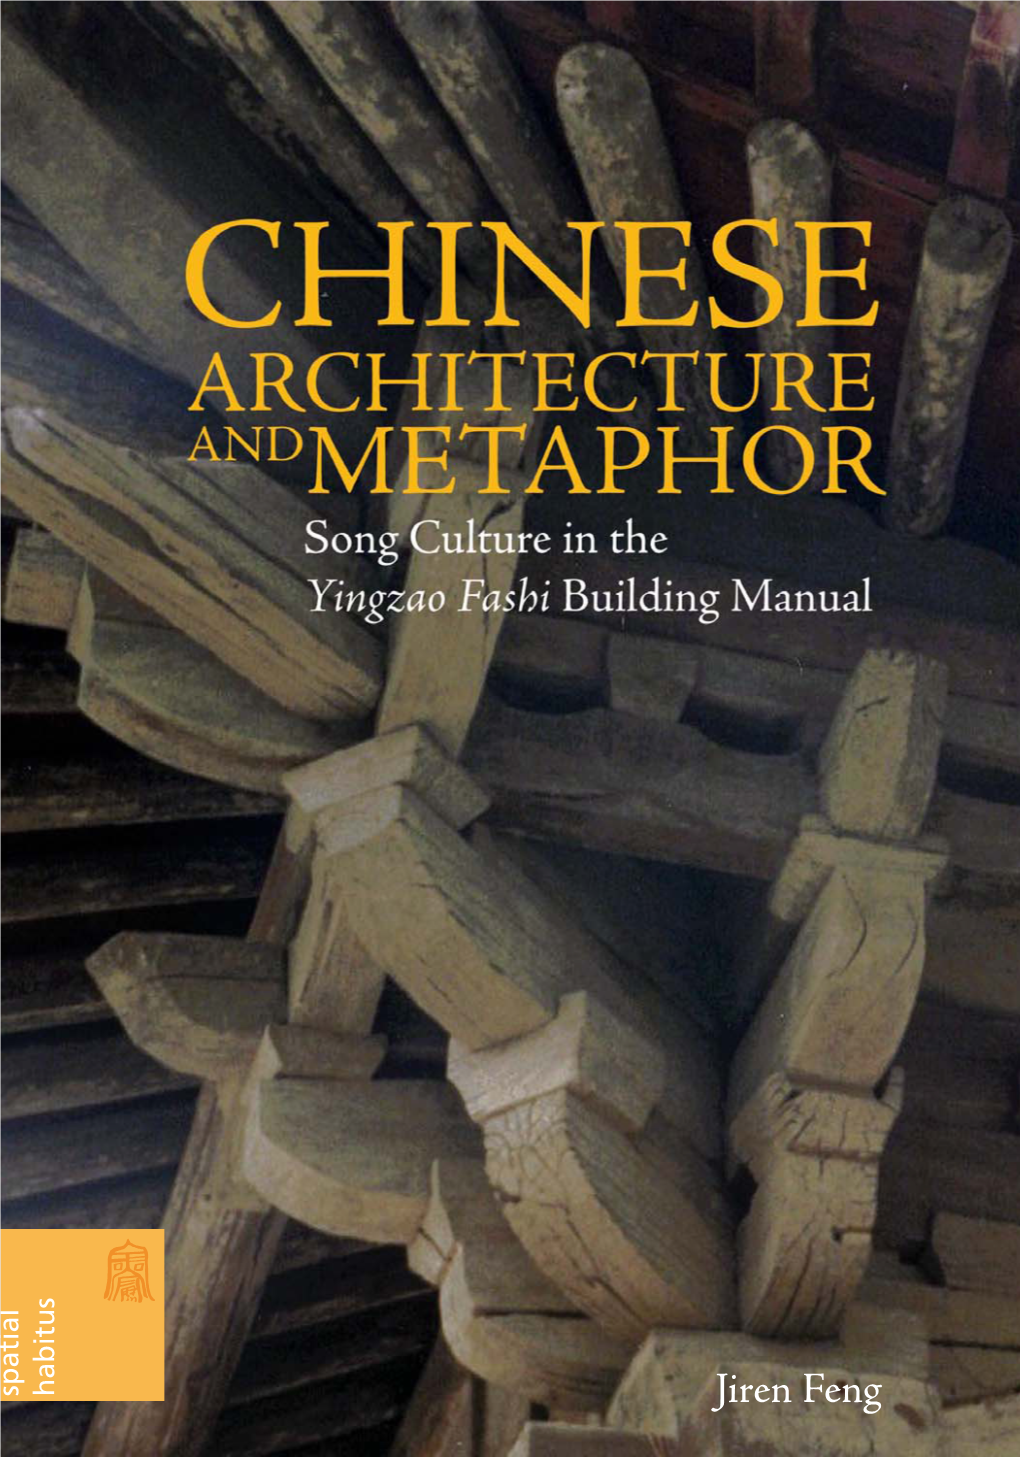 Chinese Architecture and Metaphor: Song Culture in the Yingzao Fashi